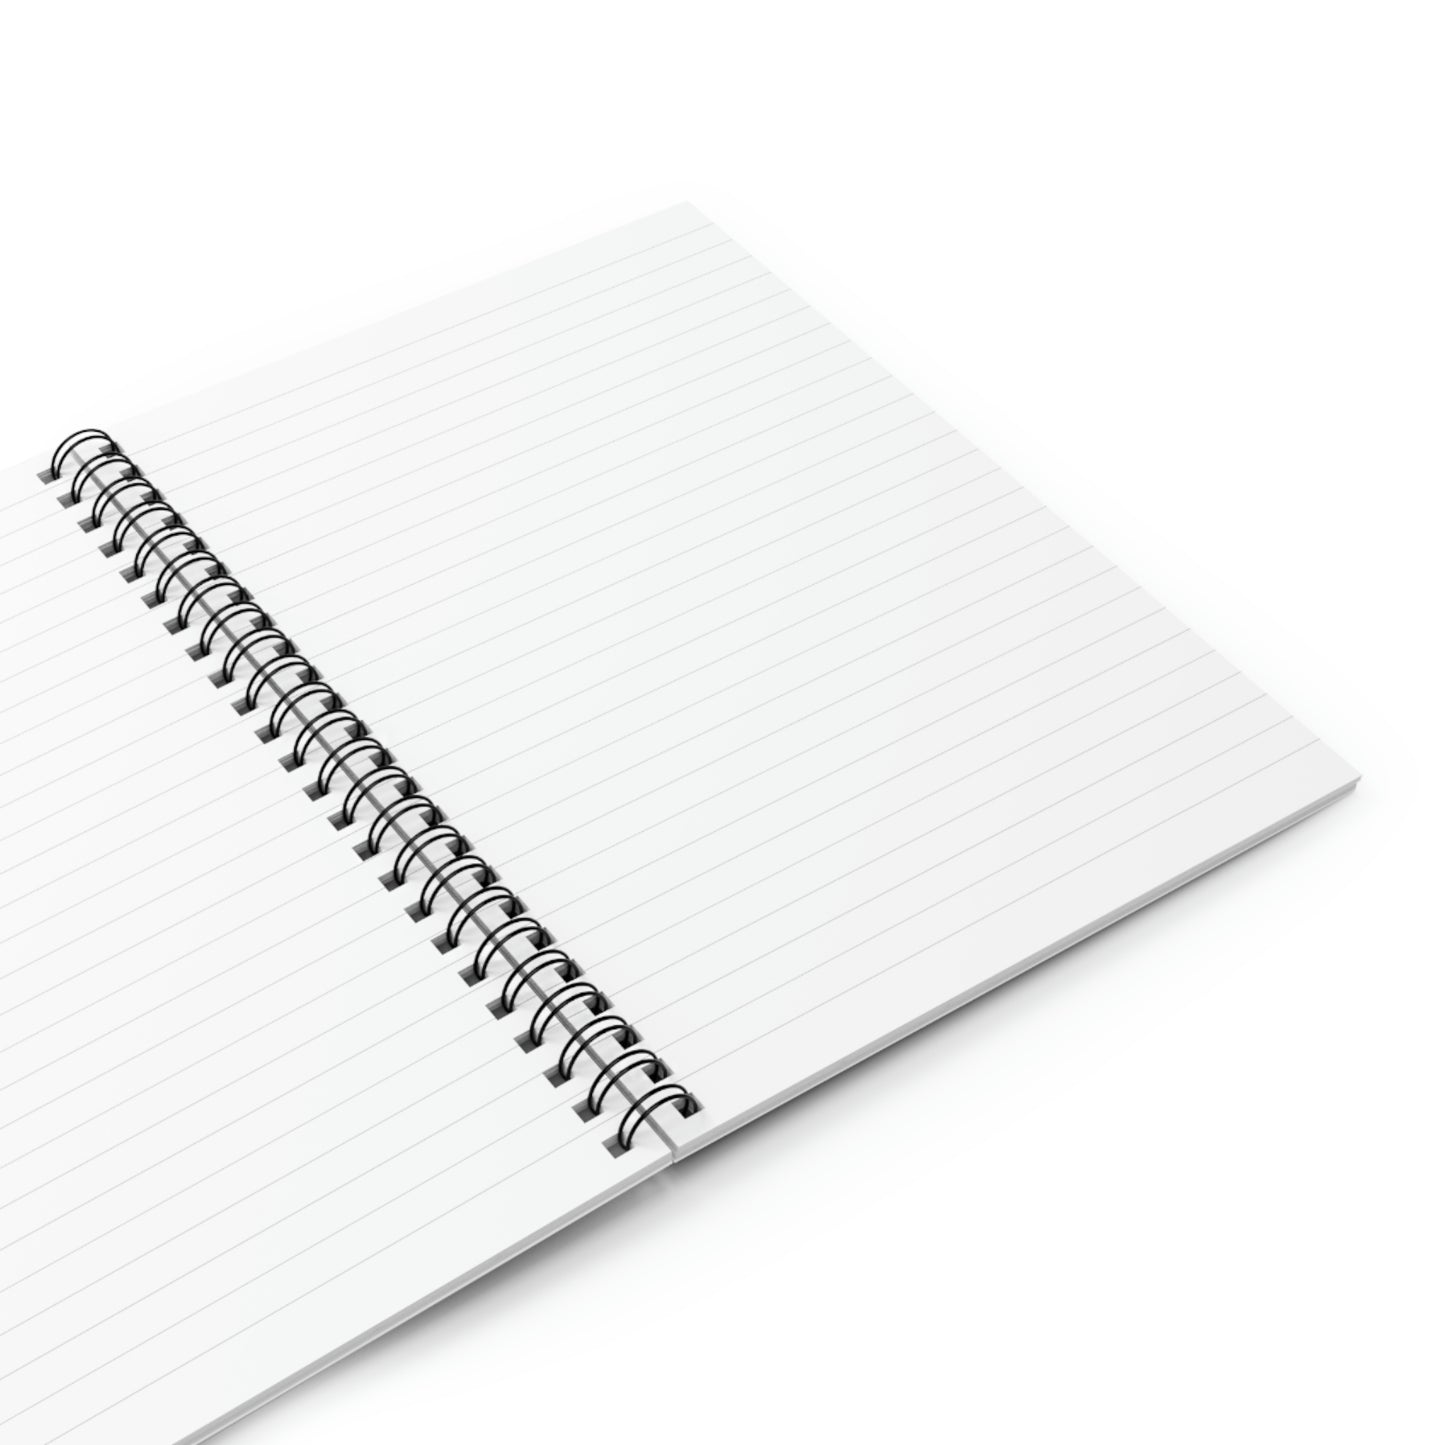 Heavy WIngs Spiral Notebook - Ruled Line